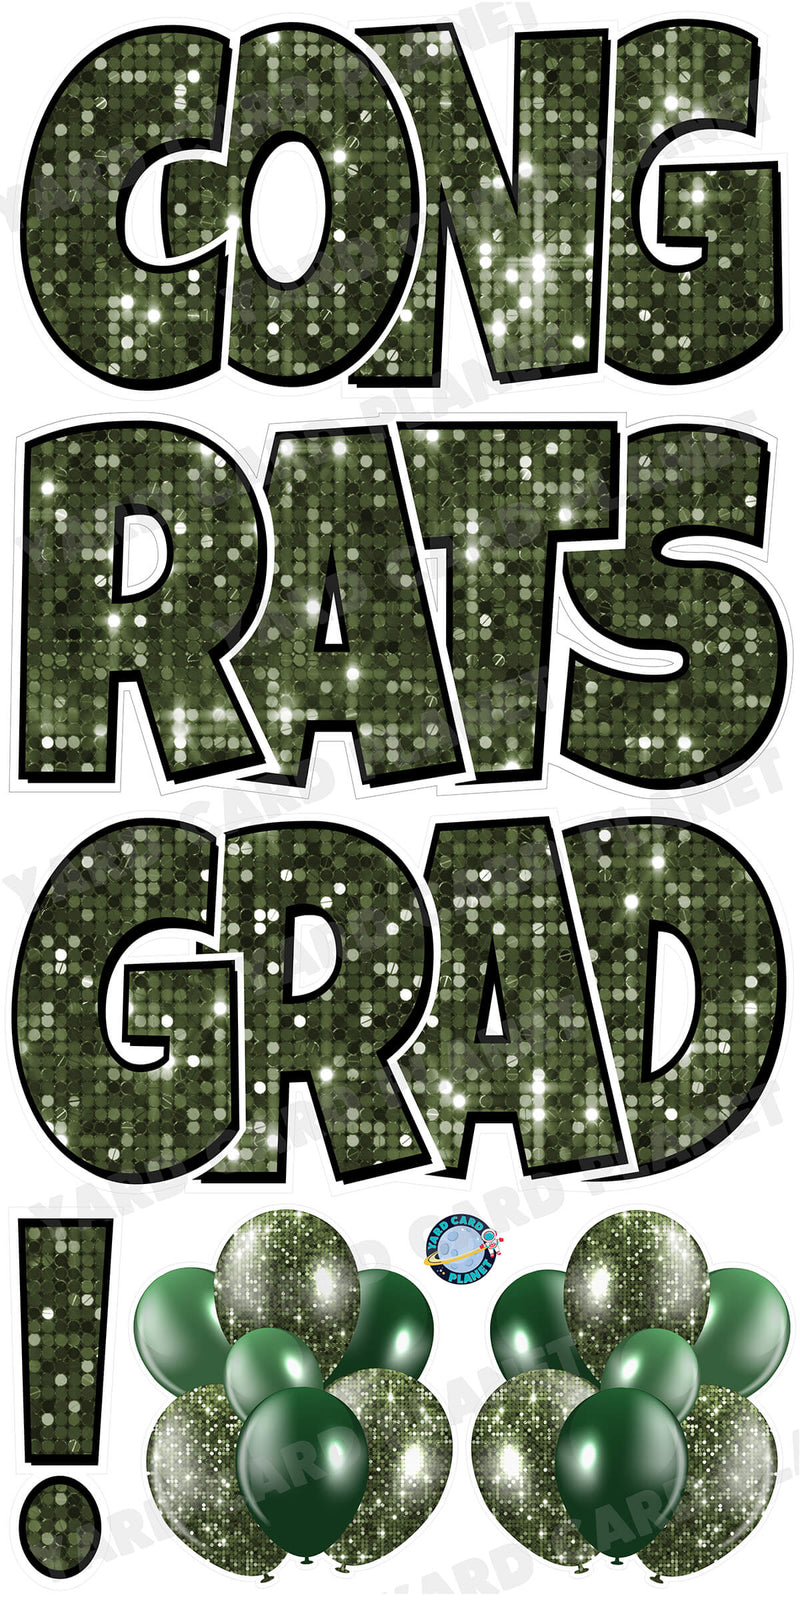 Large 23.5" Congrats Grad! Yard Card EZ Quick Sets in Luckiest Guy Font in Sequin Pattern - (Available in Multiple Colors)